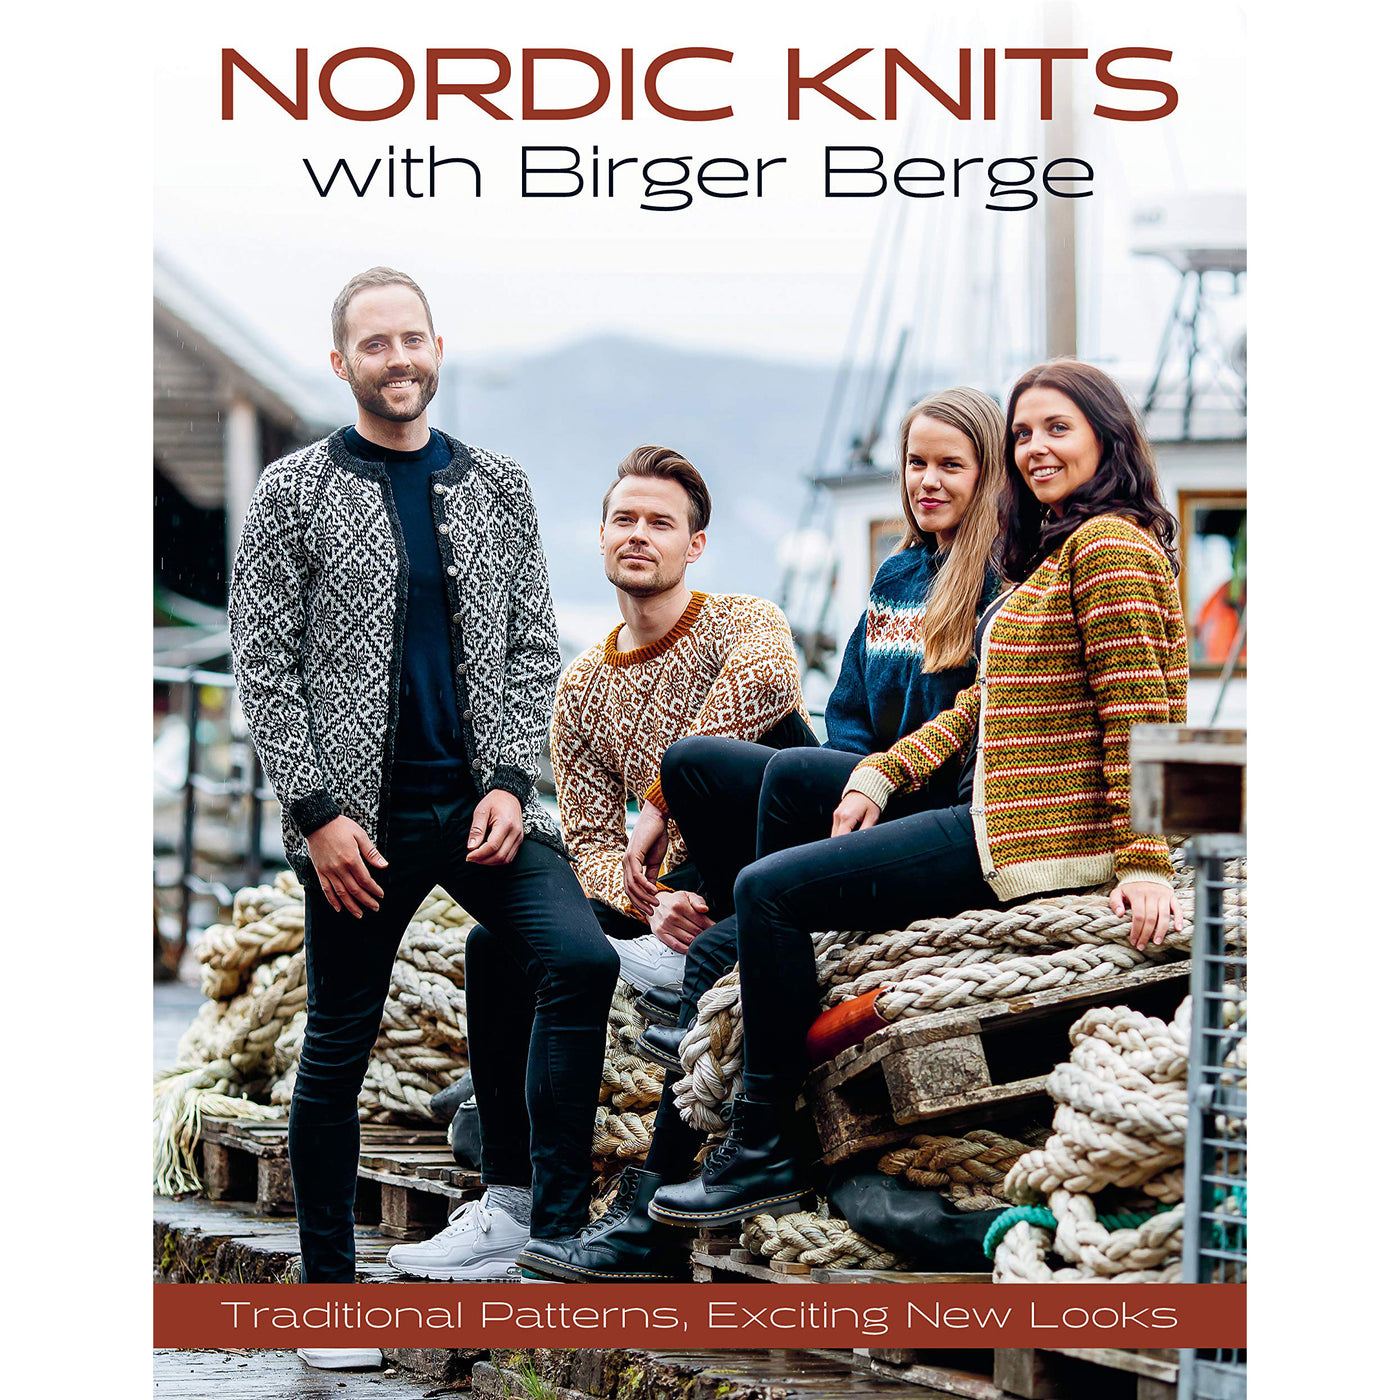 Nordic Knits with Birger Berge (Birger Berge)